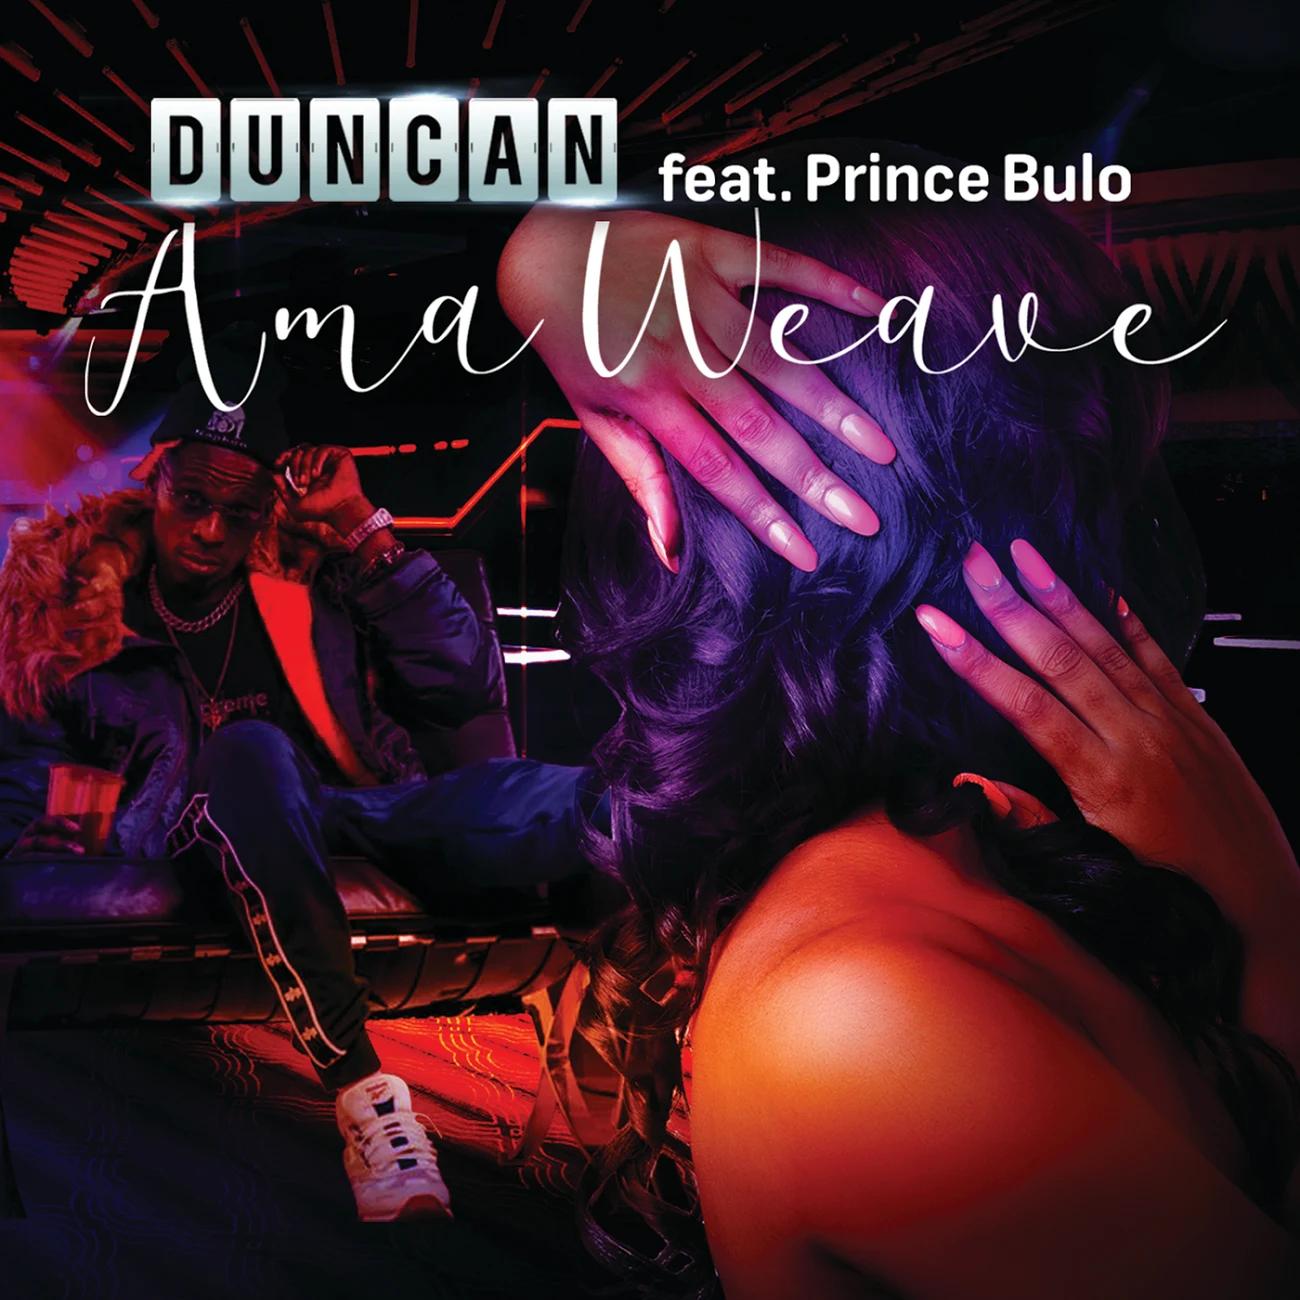 Duncan - AmaWeave (feat. Prince Bulo)